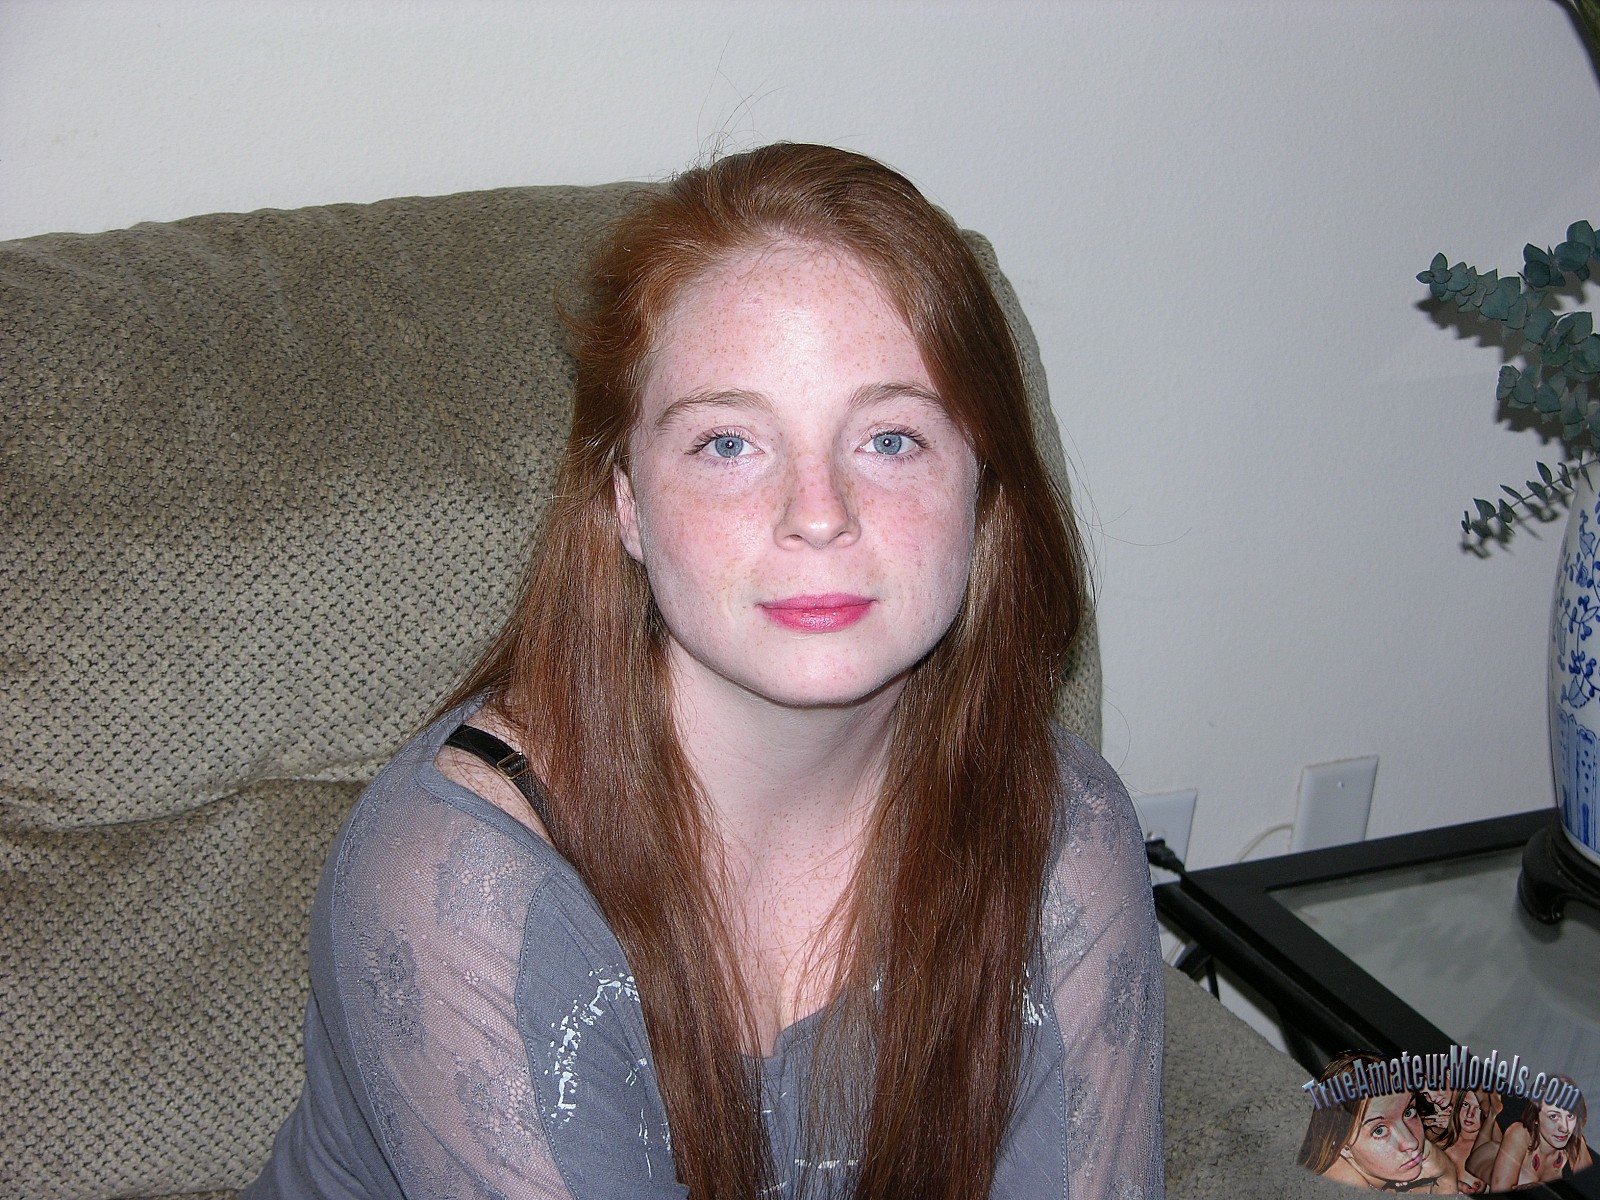 Inexperienced Redhead Teenage With Freckles & Fur covered Vulva - True  Amateur Models